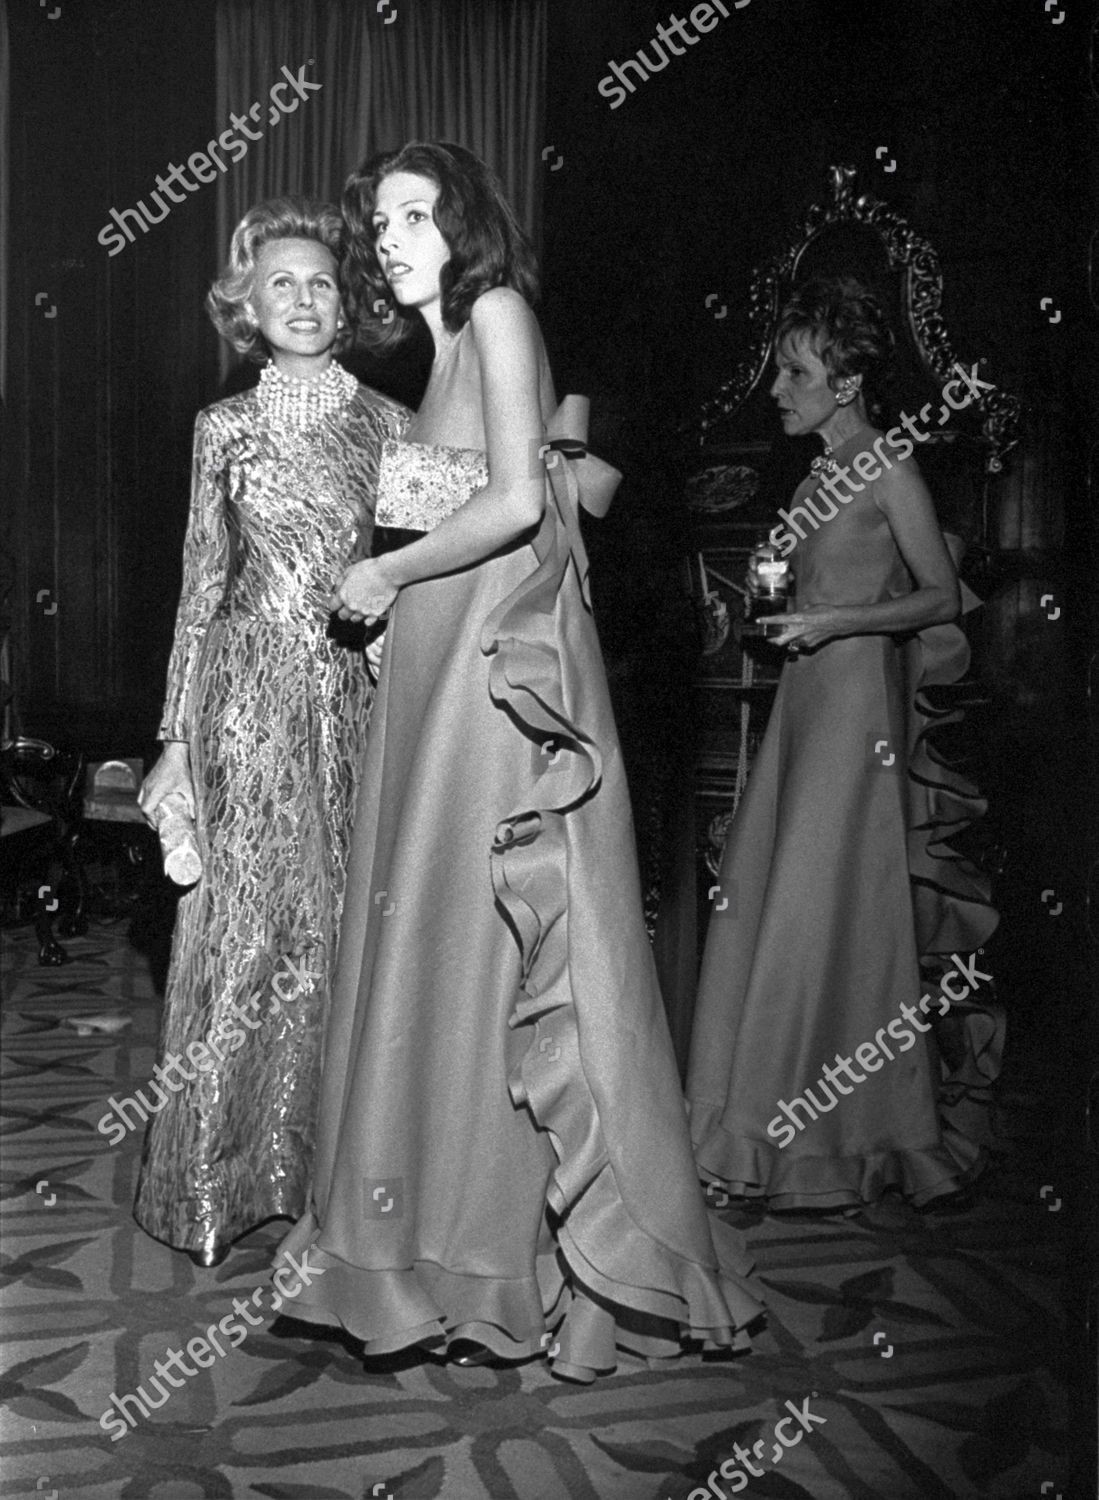 Andrea de Portago and her mother, in dresses by Christian Dior, at a party for Carmencita Marinez-Bordiú in New York. Vogue January 15, 1972. 